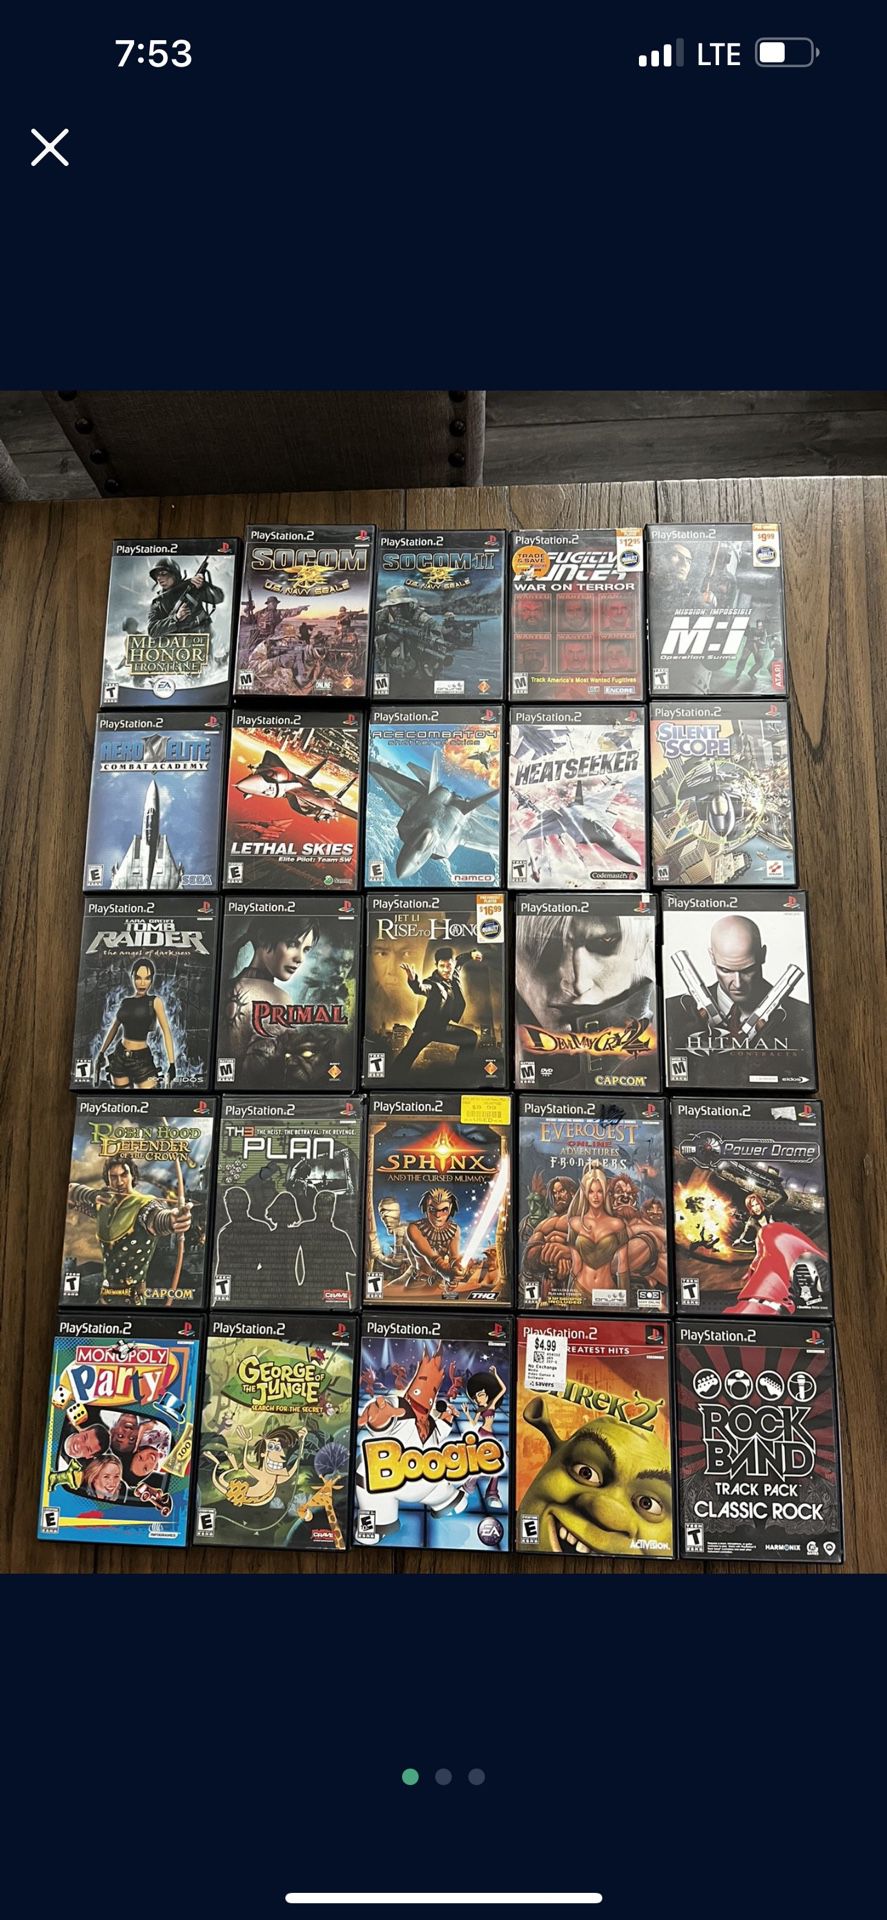 The Punisher PS2 For Sale/Trade for Sale in Fremont, CA - OfferUp